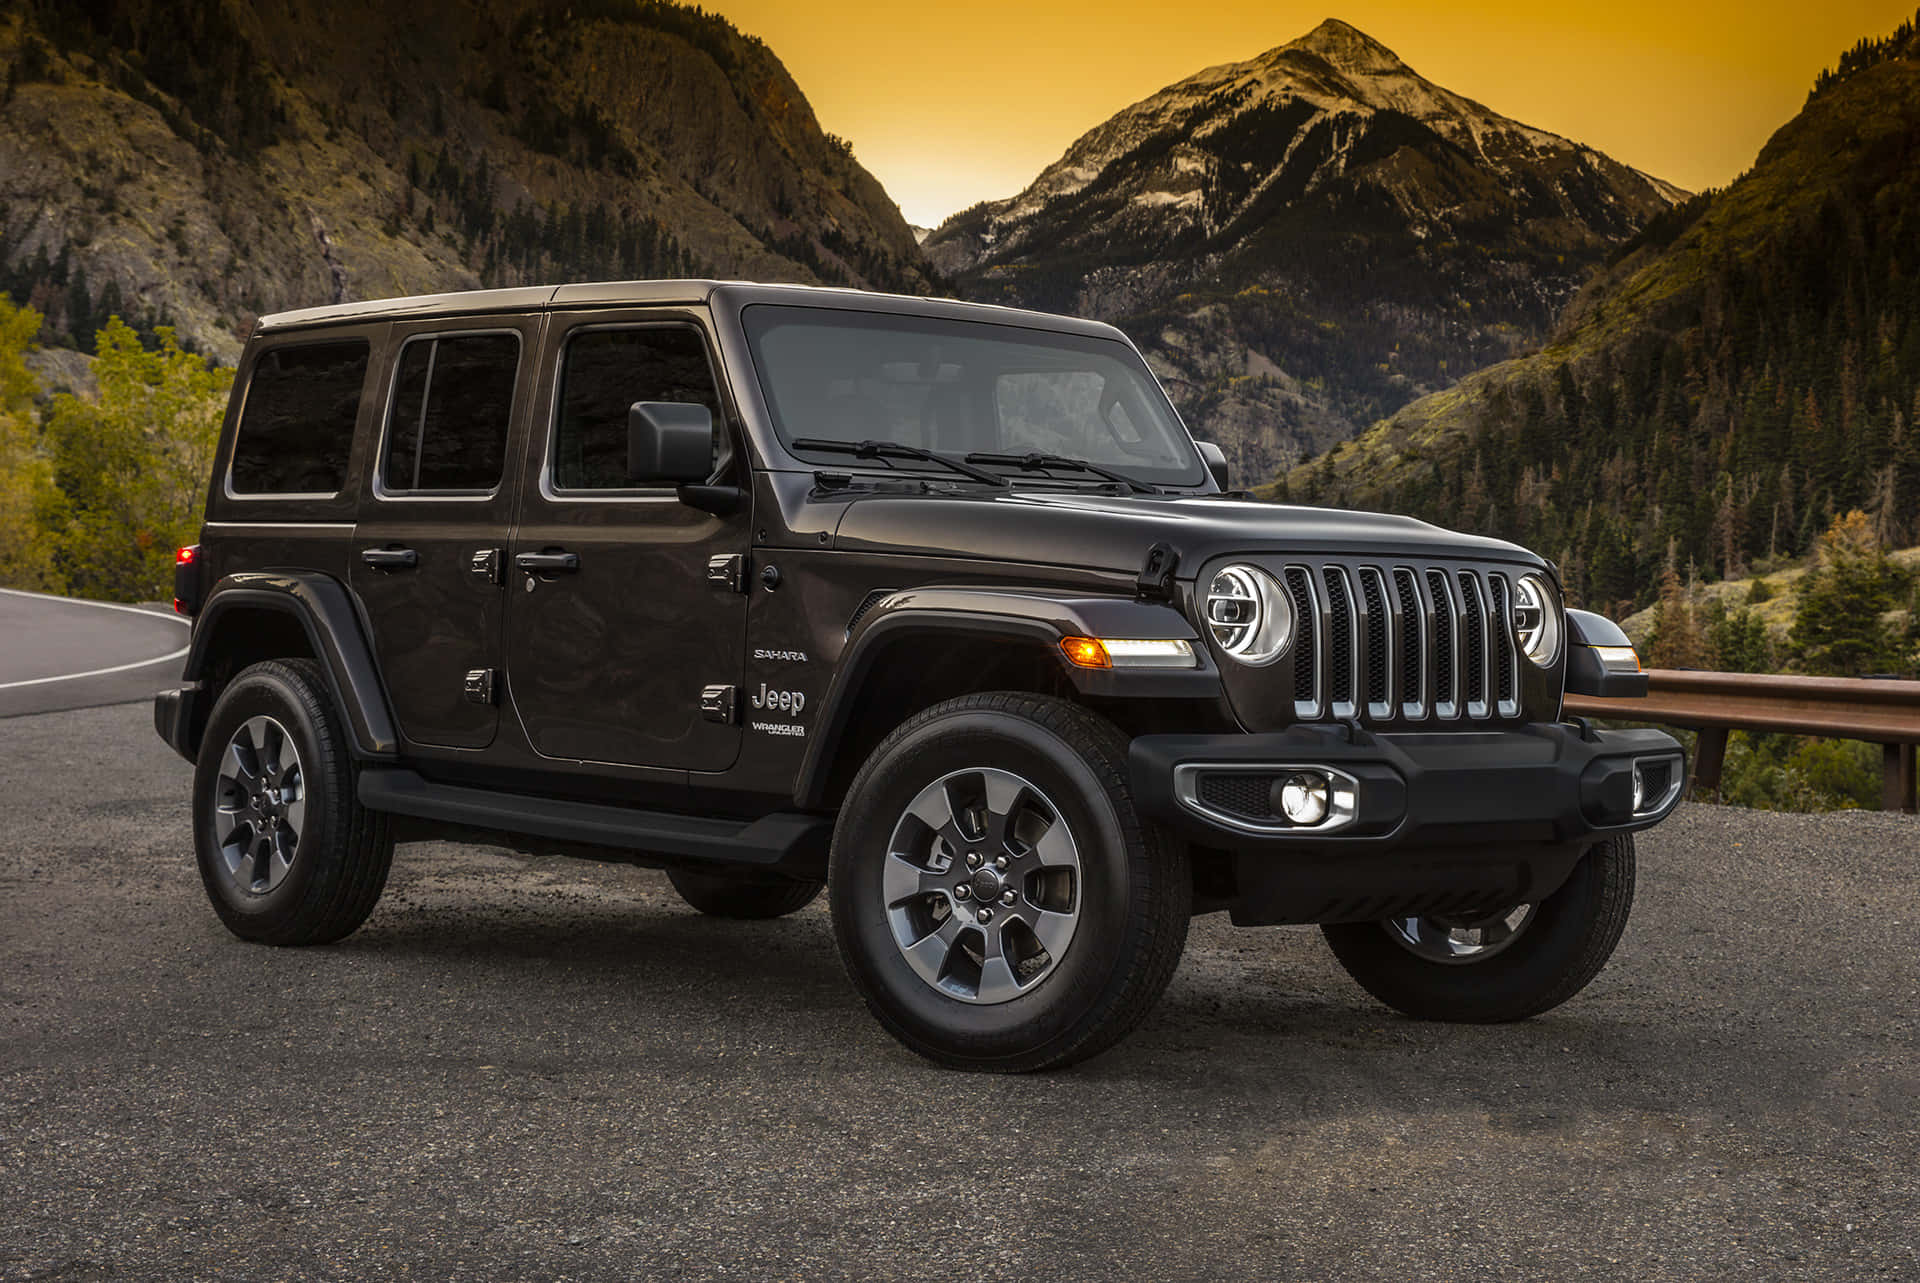 The Black Jeep Wrangler Is Parked On A Mountain Road